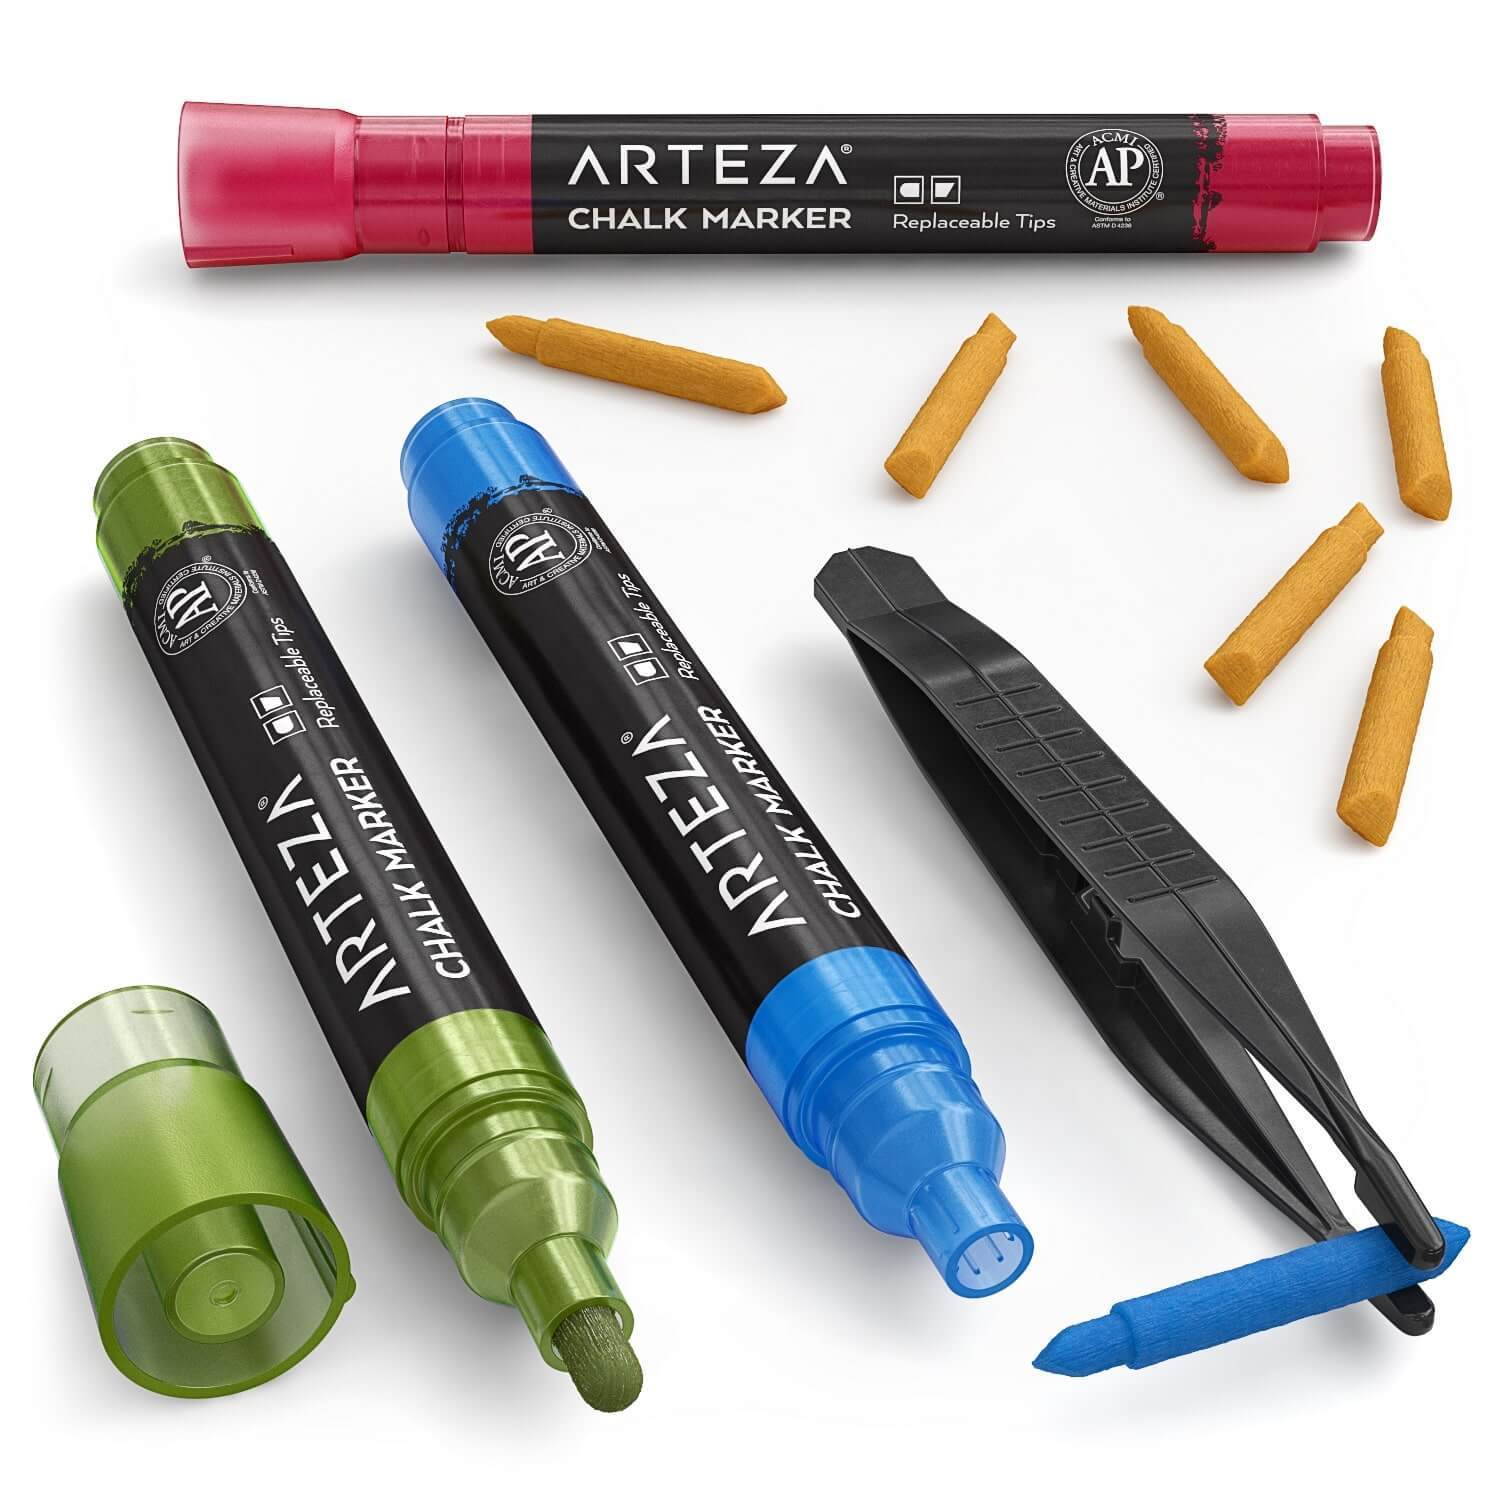 Top Chalk Erasable Chalk Markers - Reusable Markers for Easy Labeling 